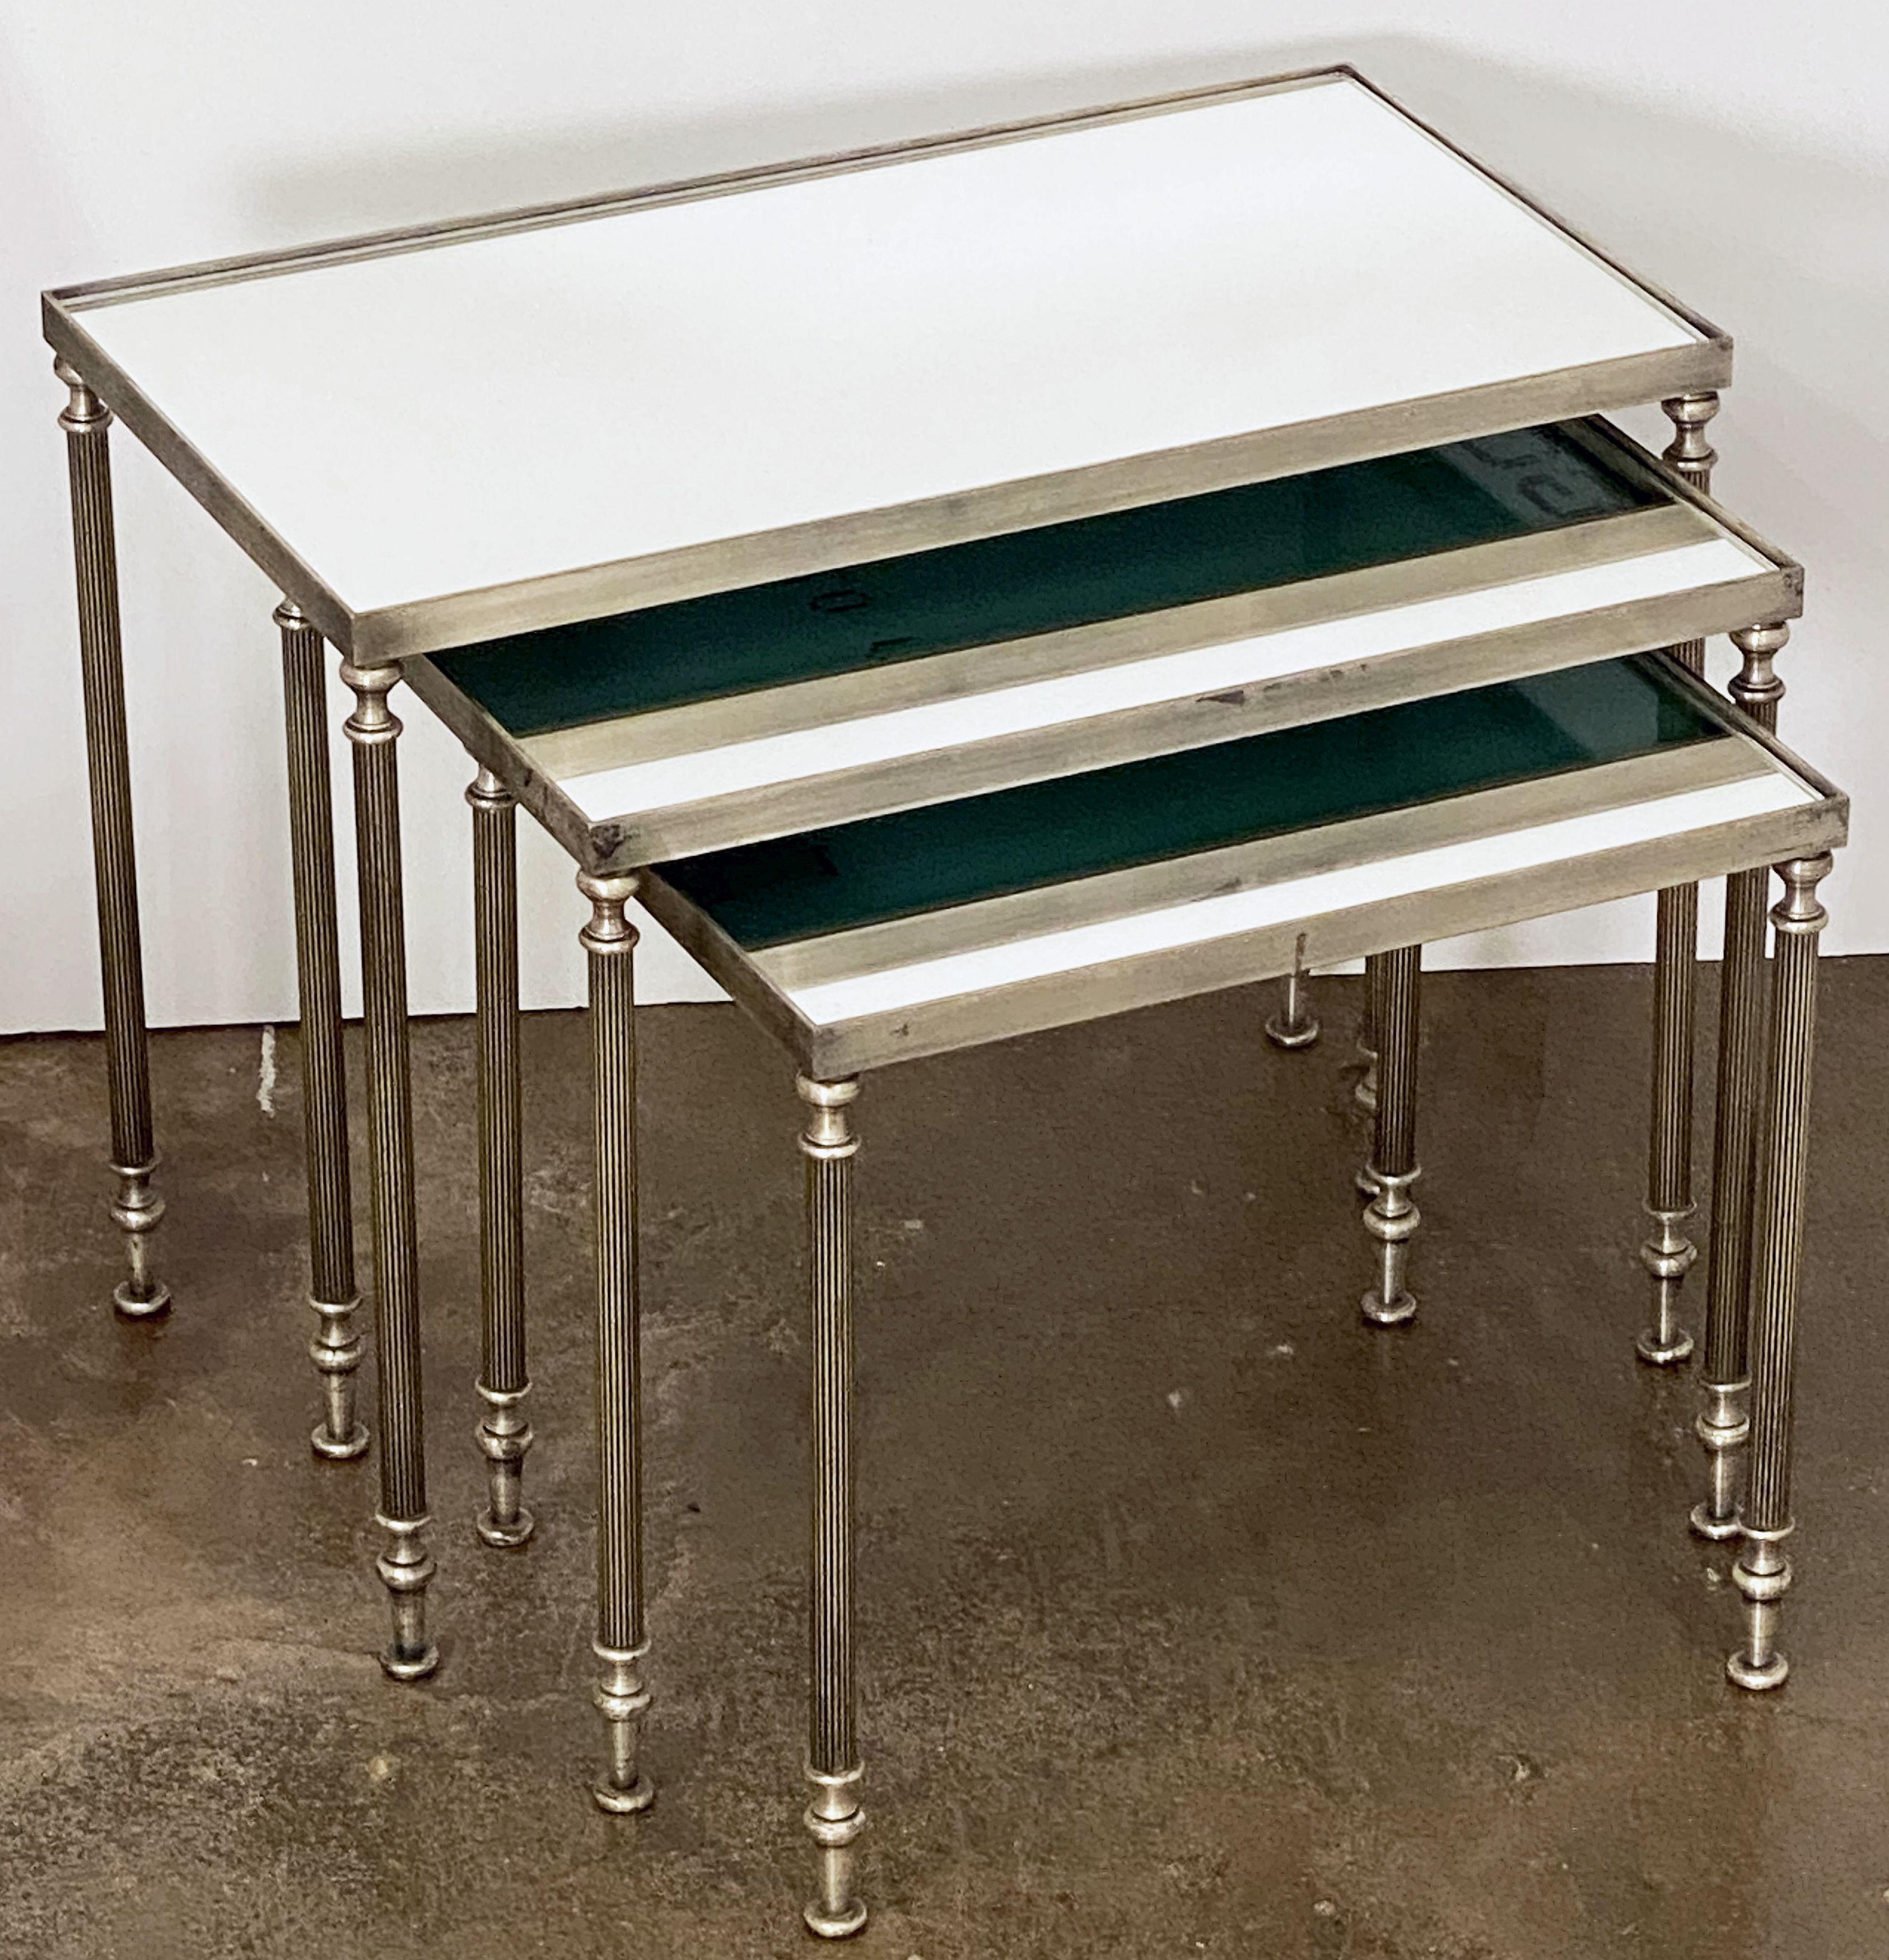 A fine set of French stacking or nesting low tables with a stylish Mid-Century Modern design. 
The set featuring three fitted tables - each with a rectangular frame inset with a mirrored glass top.

Great for use as cocktail or coffee tables as